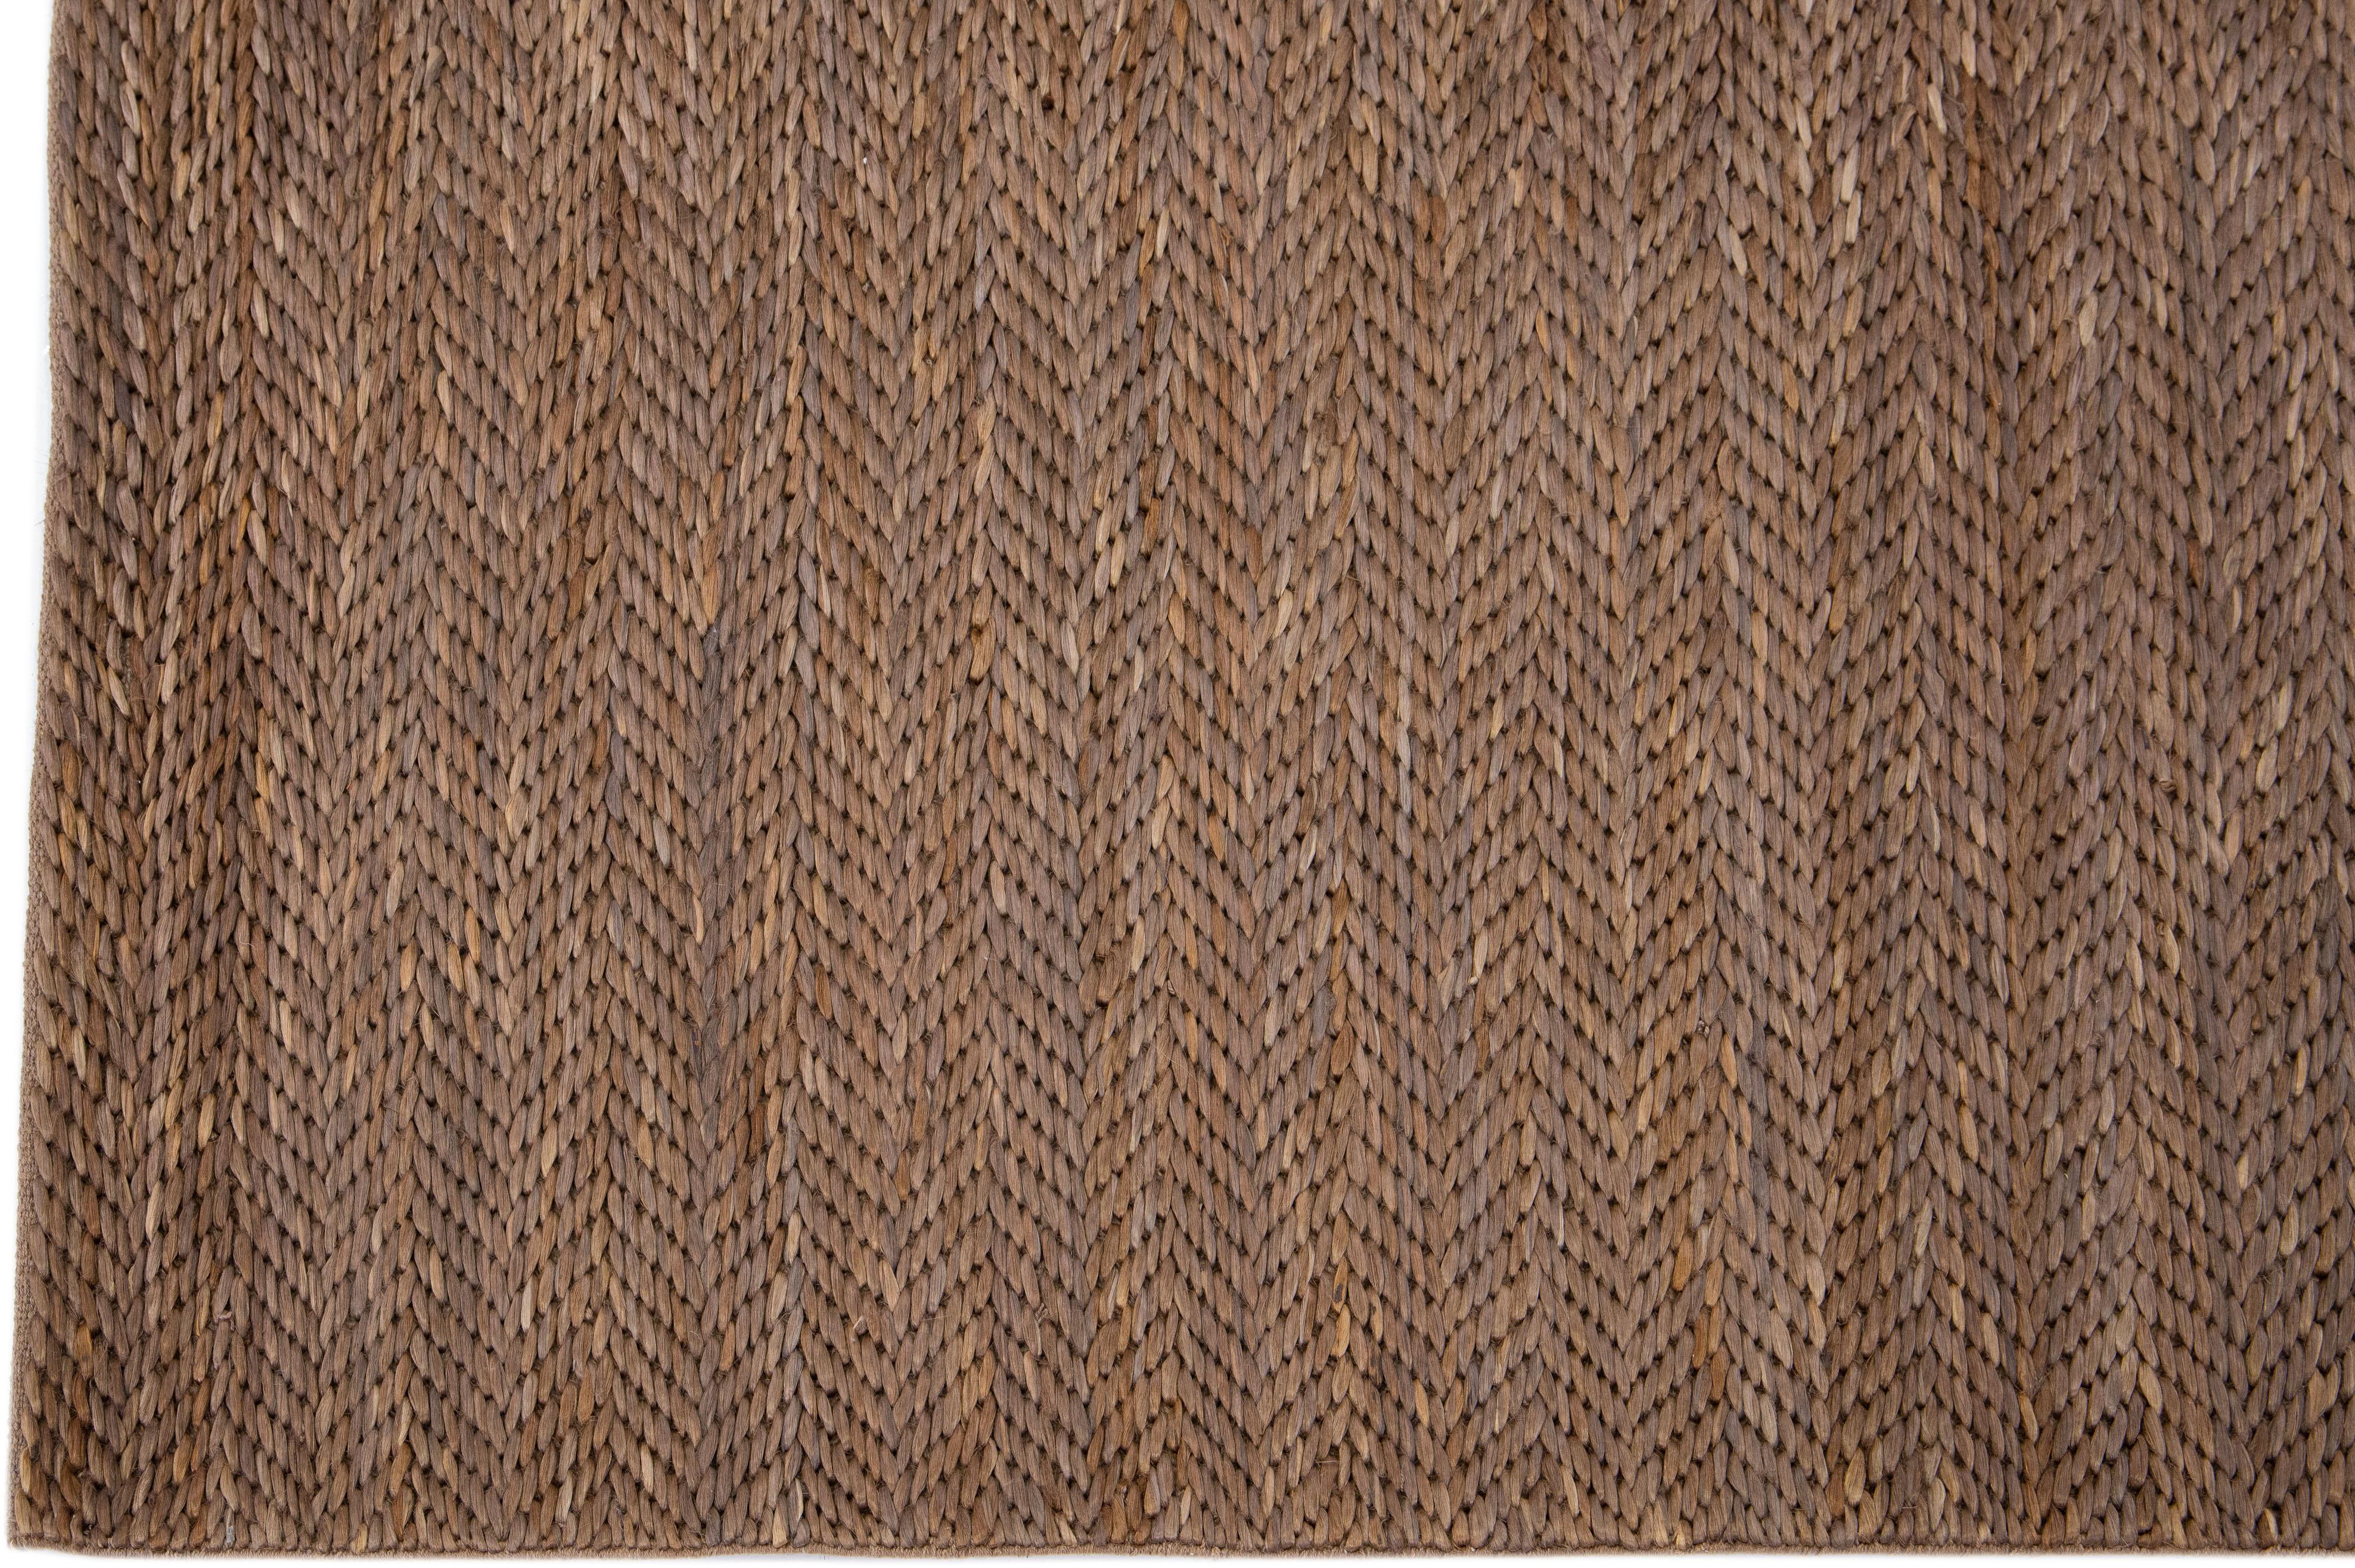 Hand-Woven Modern Natural Texture Hand Woven Jute & Cotton Area Rug with Brown Color For Sale